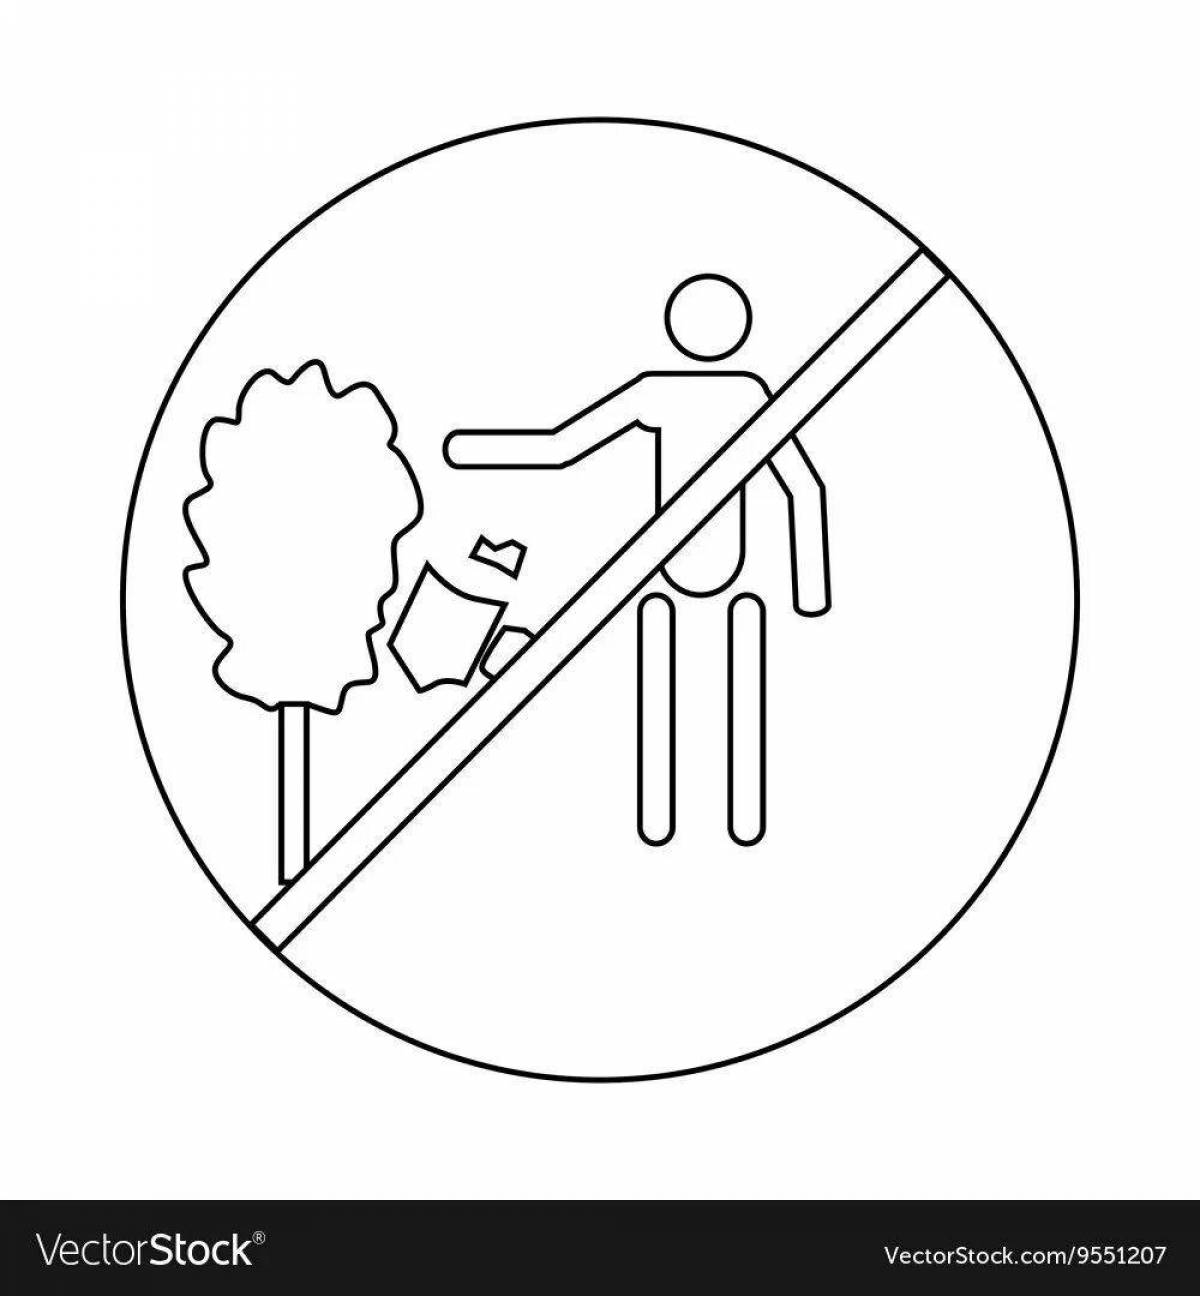 Coloring page joyful safety sign